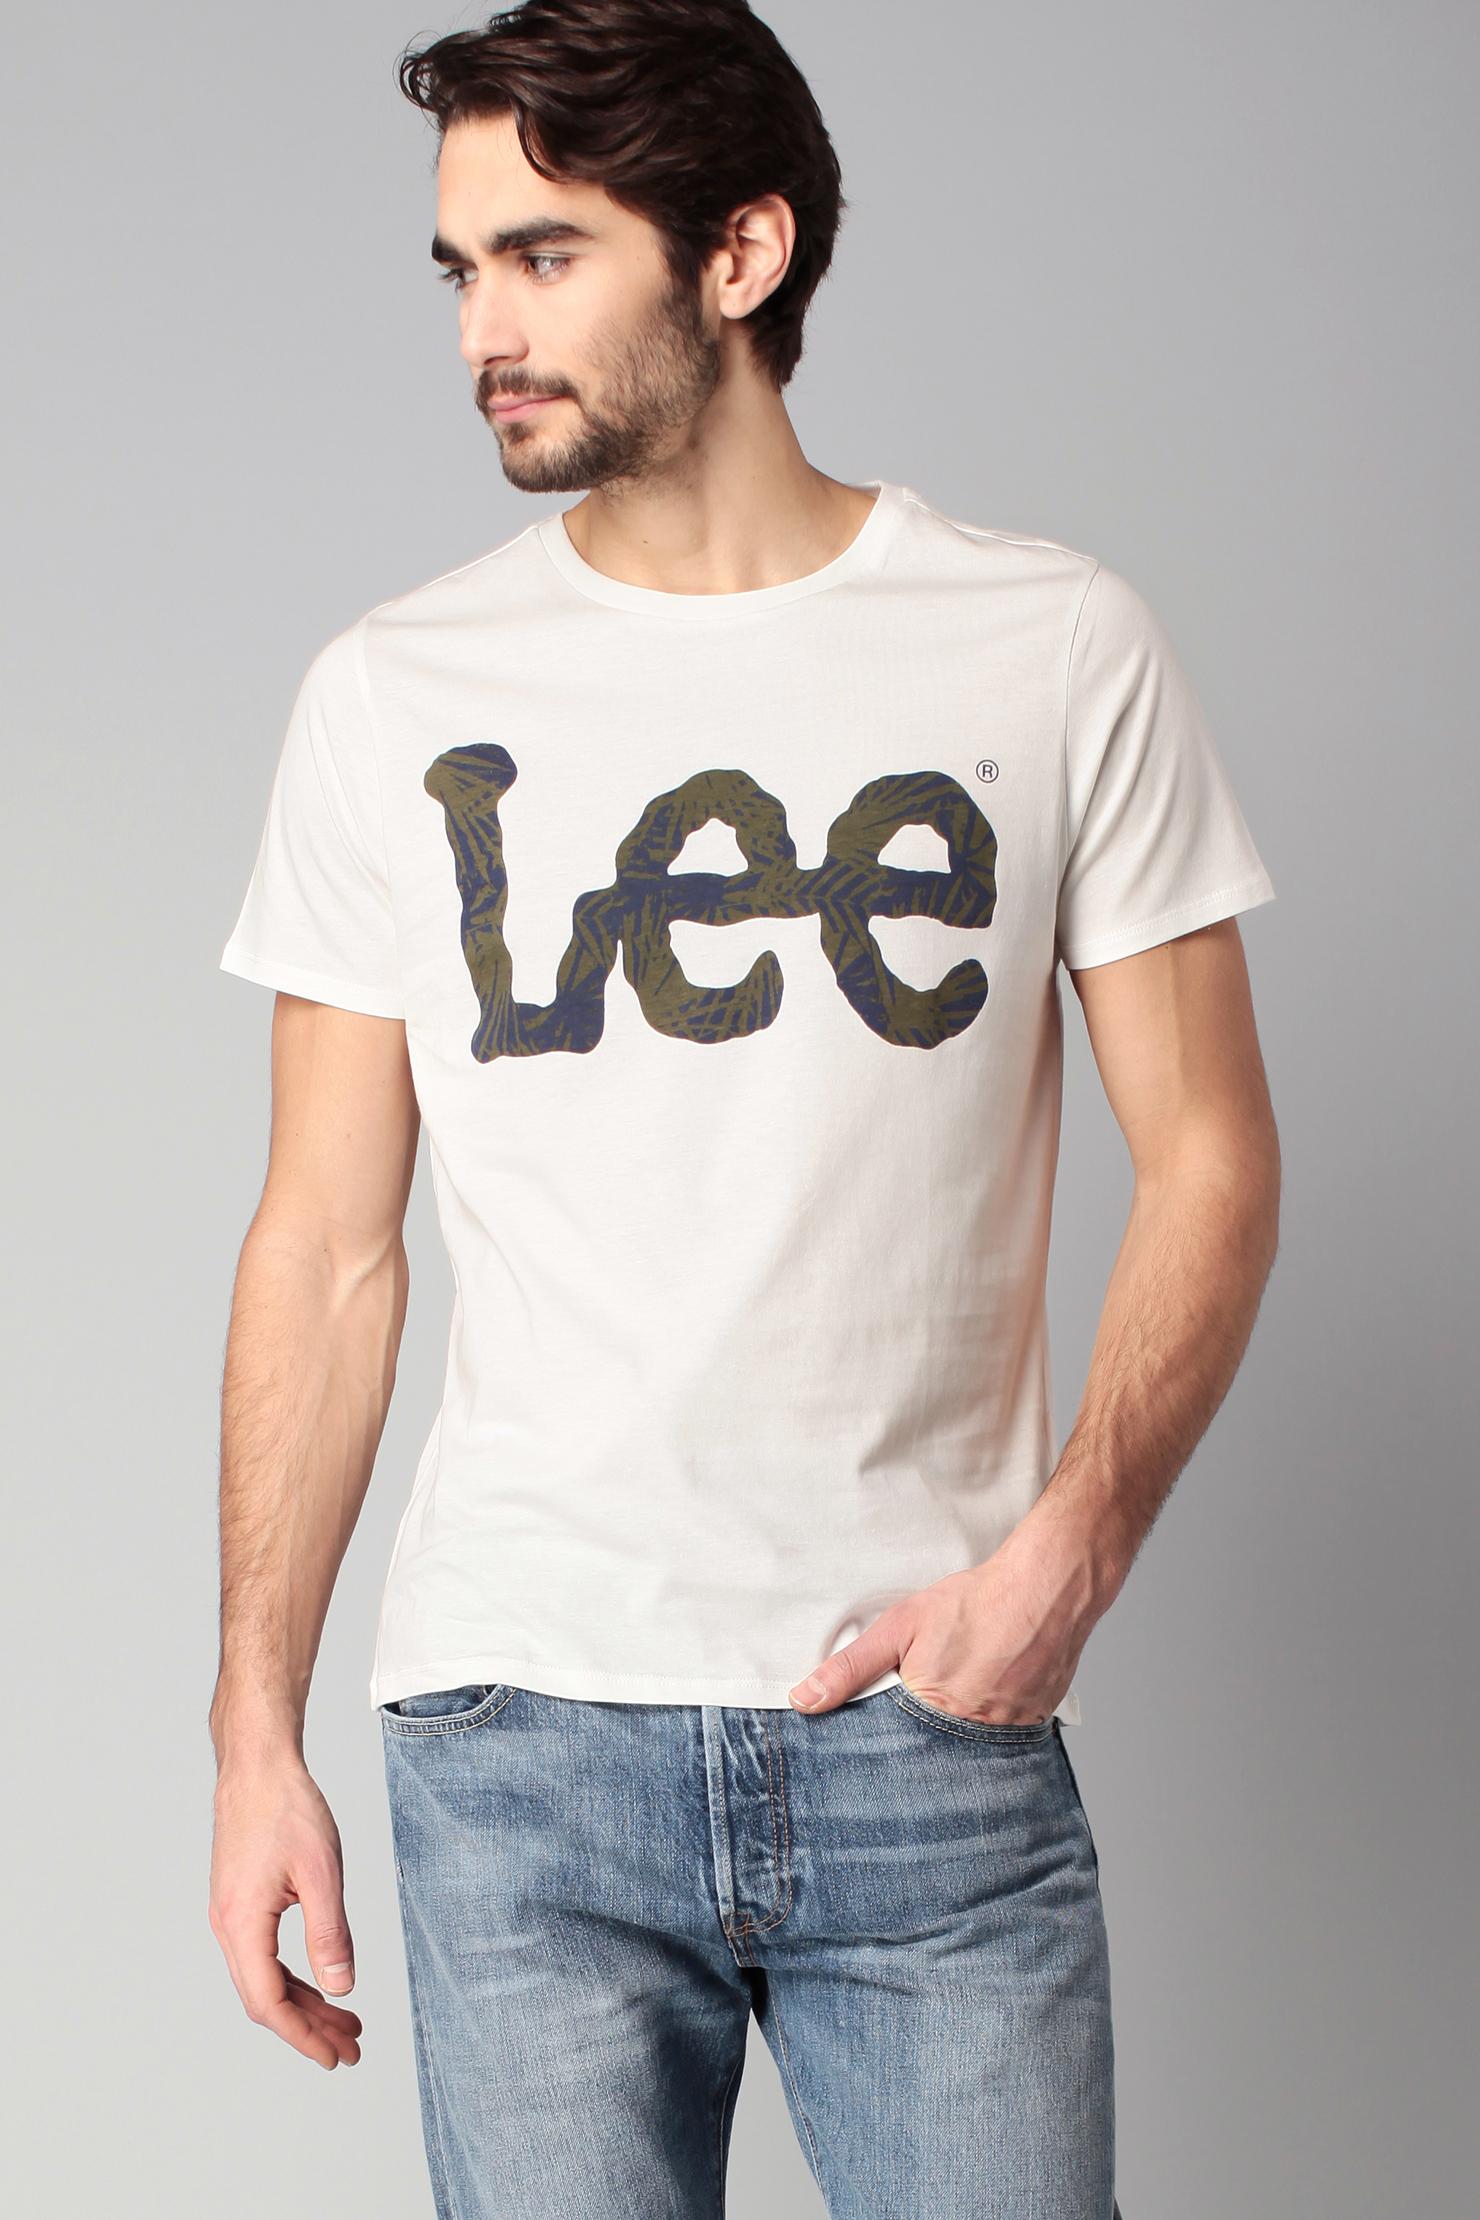 Lee jeans T-shirt in White for Men | Lyst